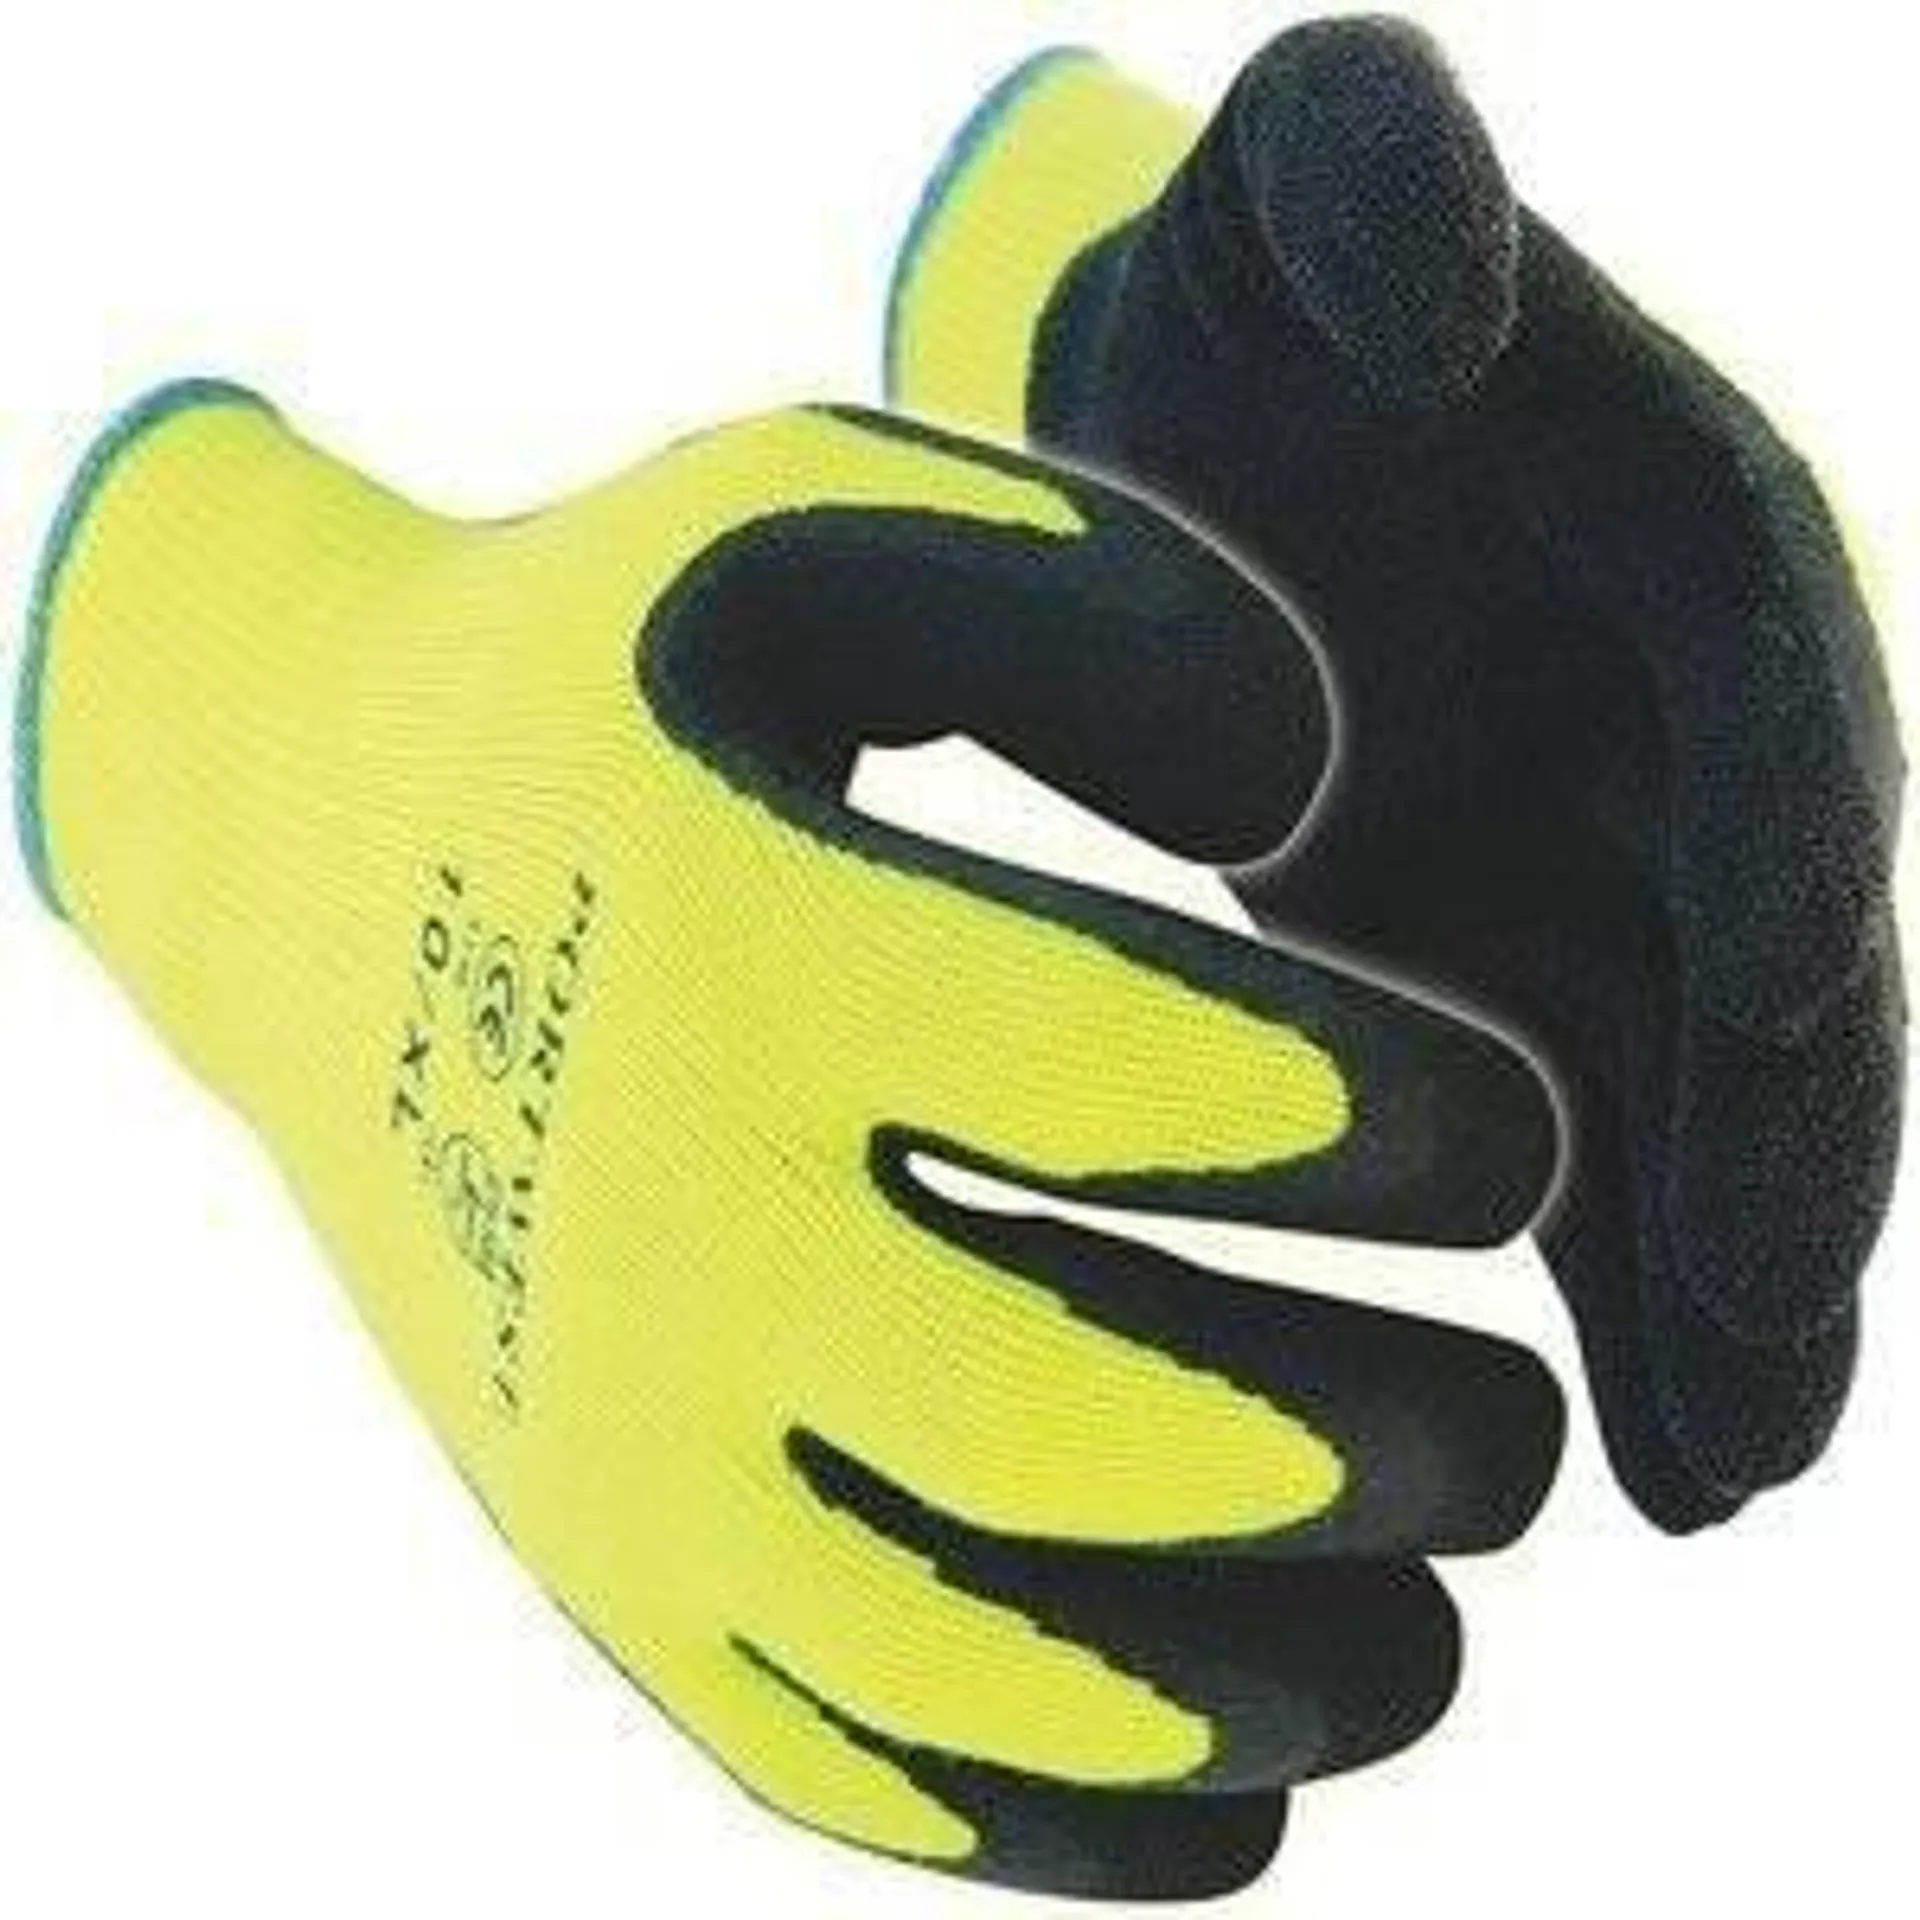 PORTWEST THERMAL GRIP GLOVES YELLOW/BLACK